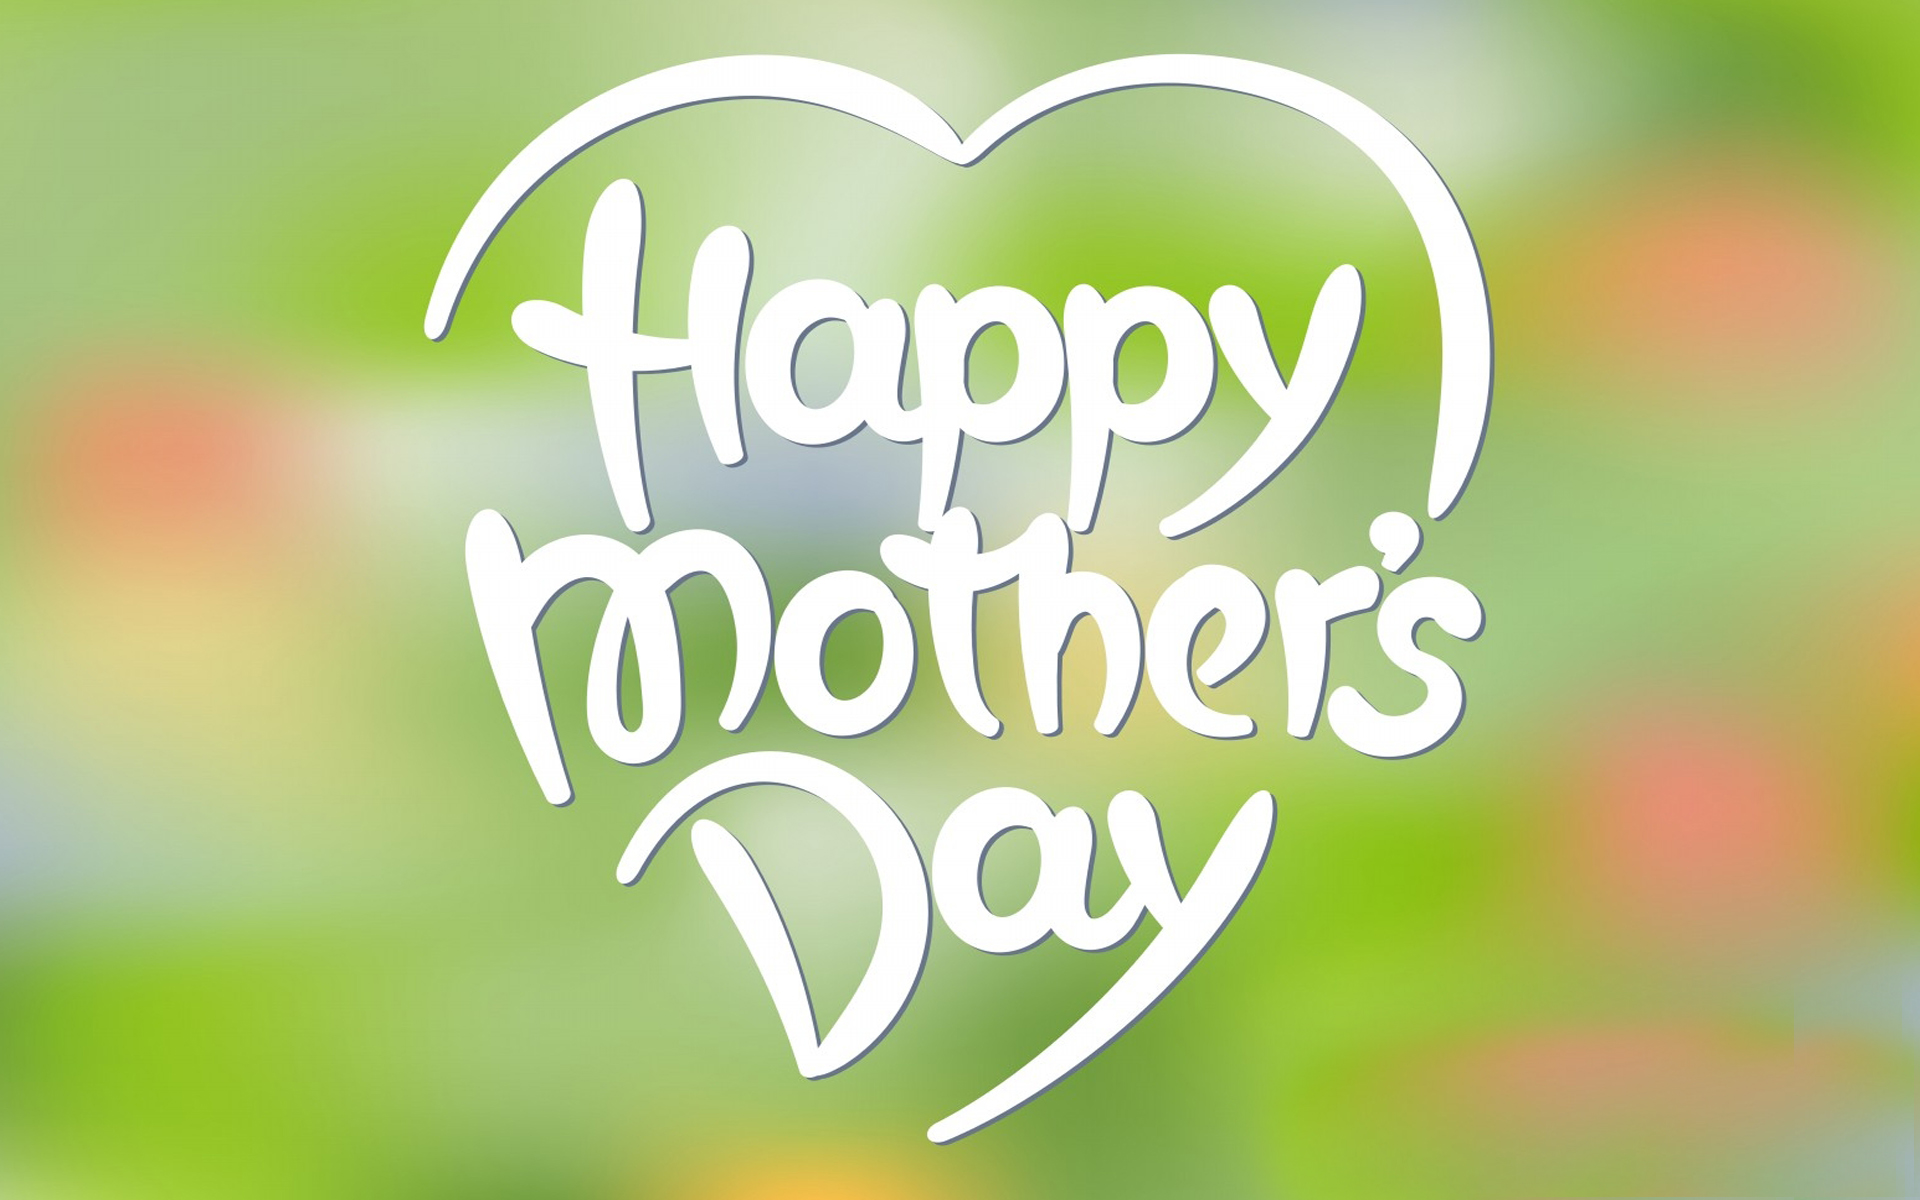 Happy Mother's Day HD Images, Wallpapers Free Download